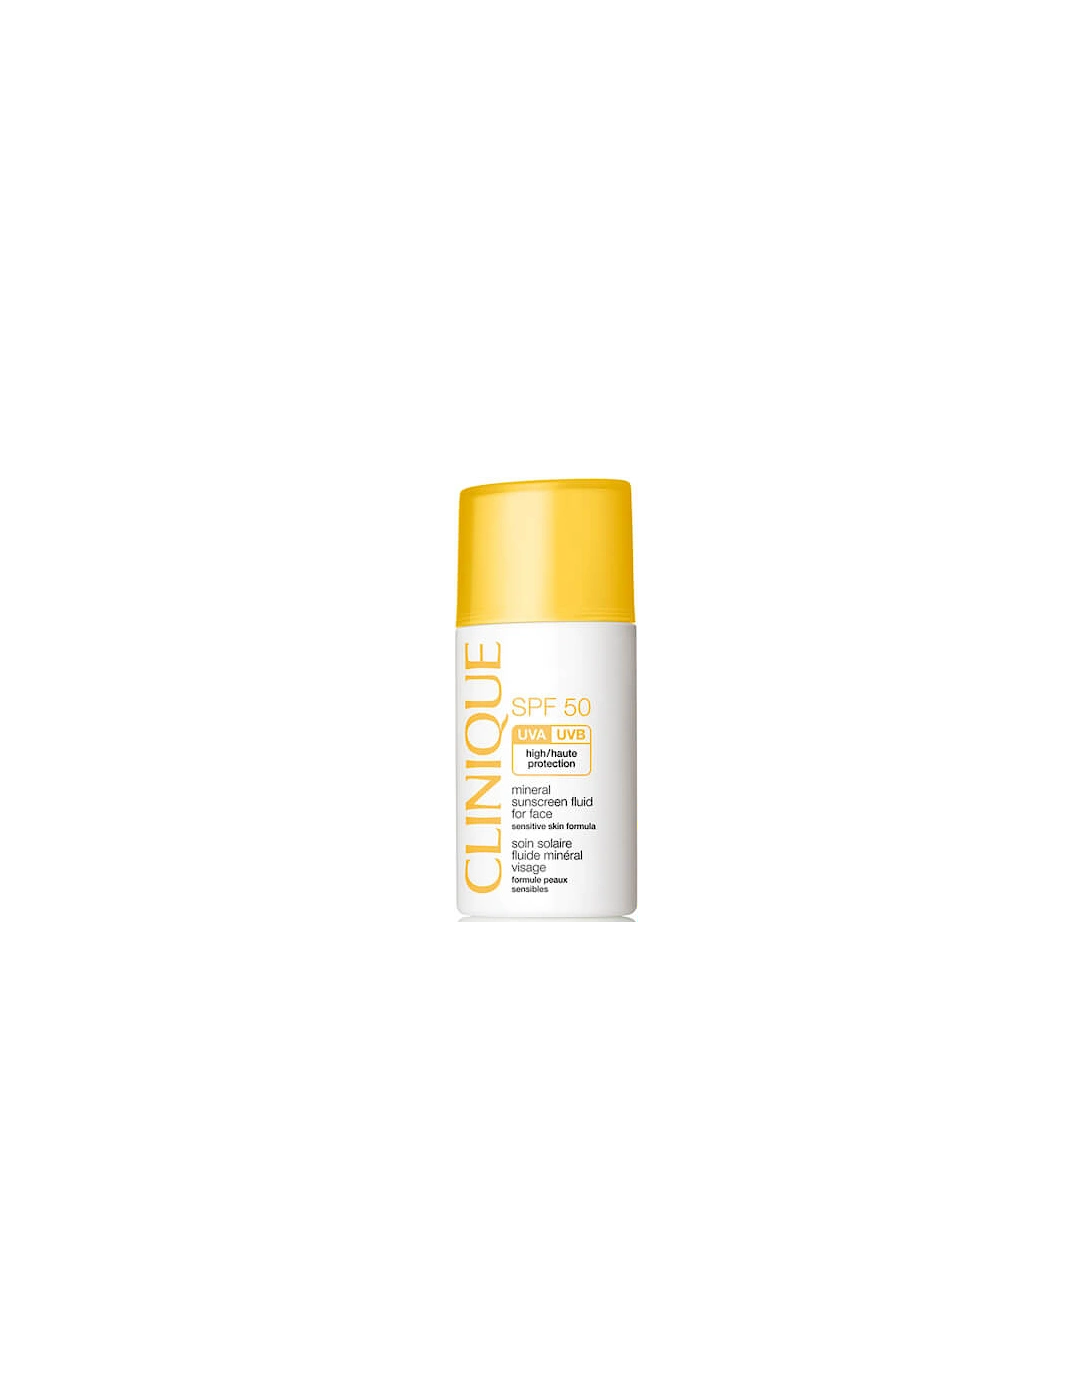 Mineral Sunscreen Fluid for Face SPF50 30ml, 2 of 1